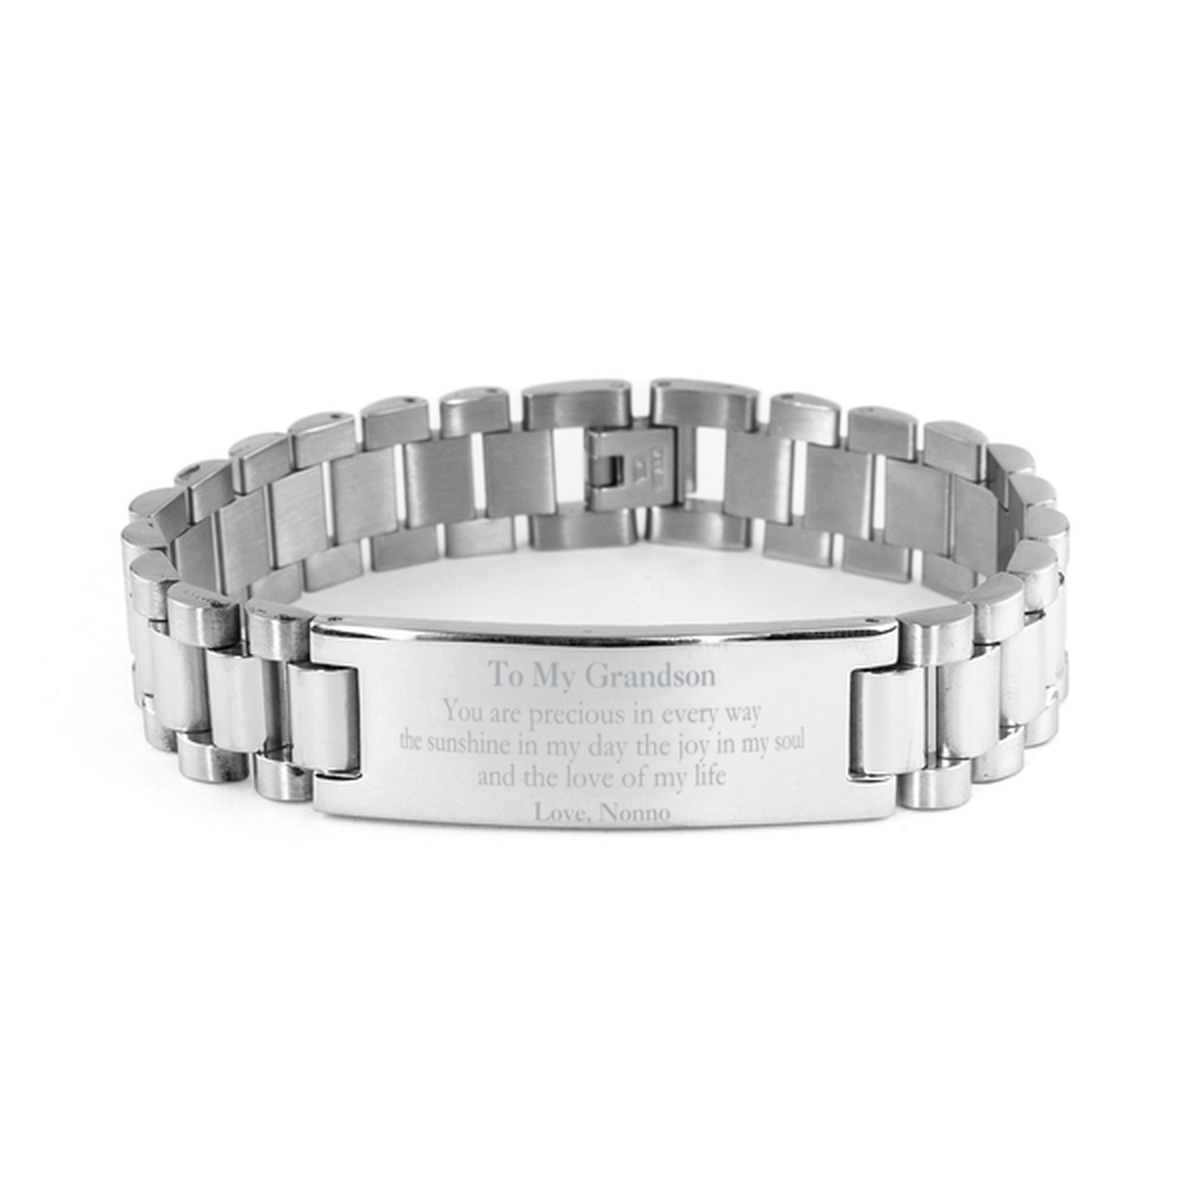 Graduation Gifts for Grandson Ladder Stainless Steel Bracelet Present from Nonno, Christmas Grandson Birthday Gifts Grandson You are precious in every way the sunshine in my day. Love, Nonno